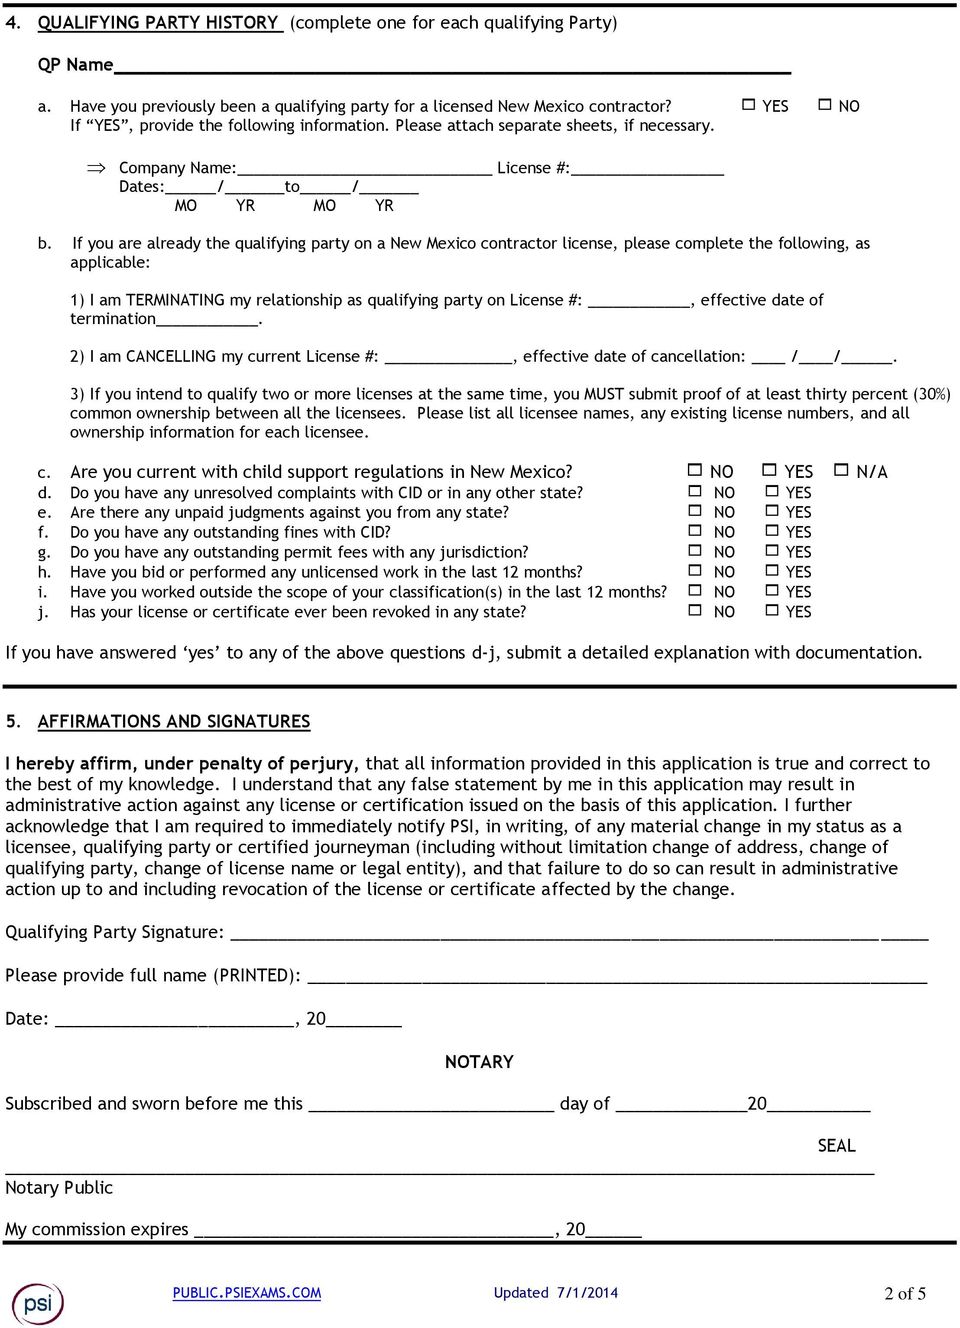 If you are already the qualifying party on a New Mexico contractor license, please complete the following, as applicable: 1) I am TERMINATING my relationship as qualifying party on License #:,